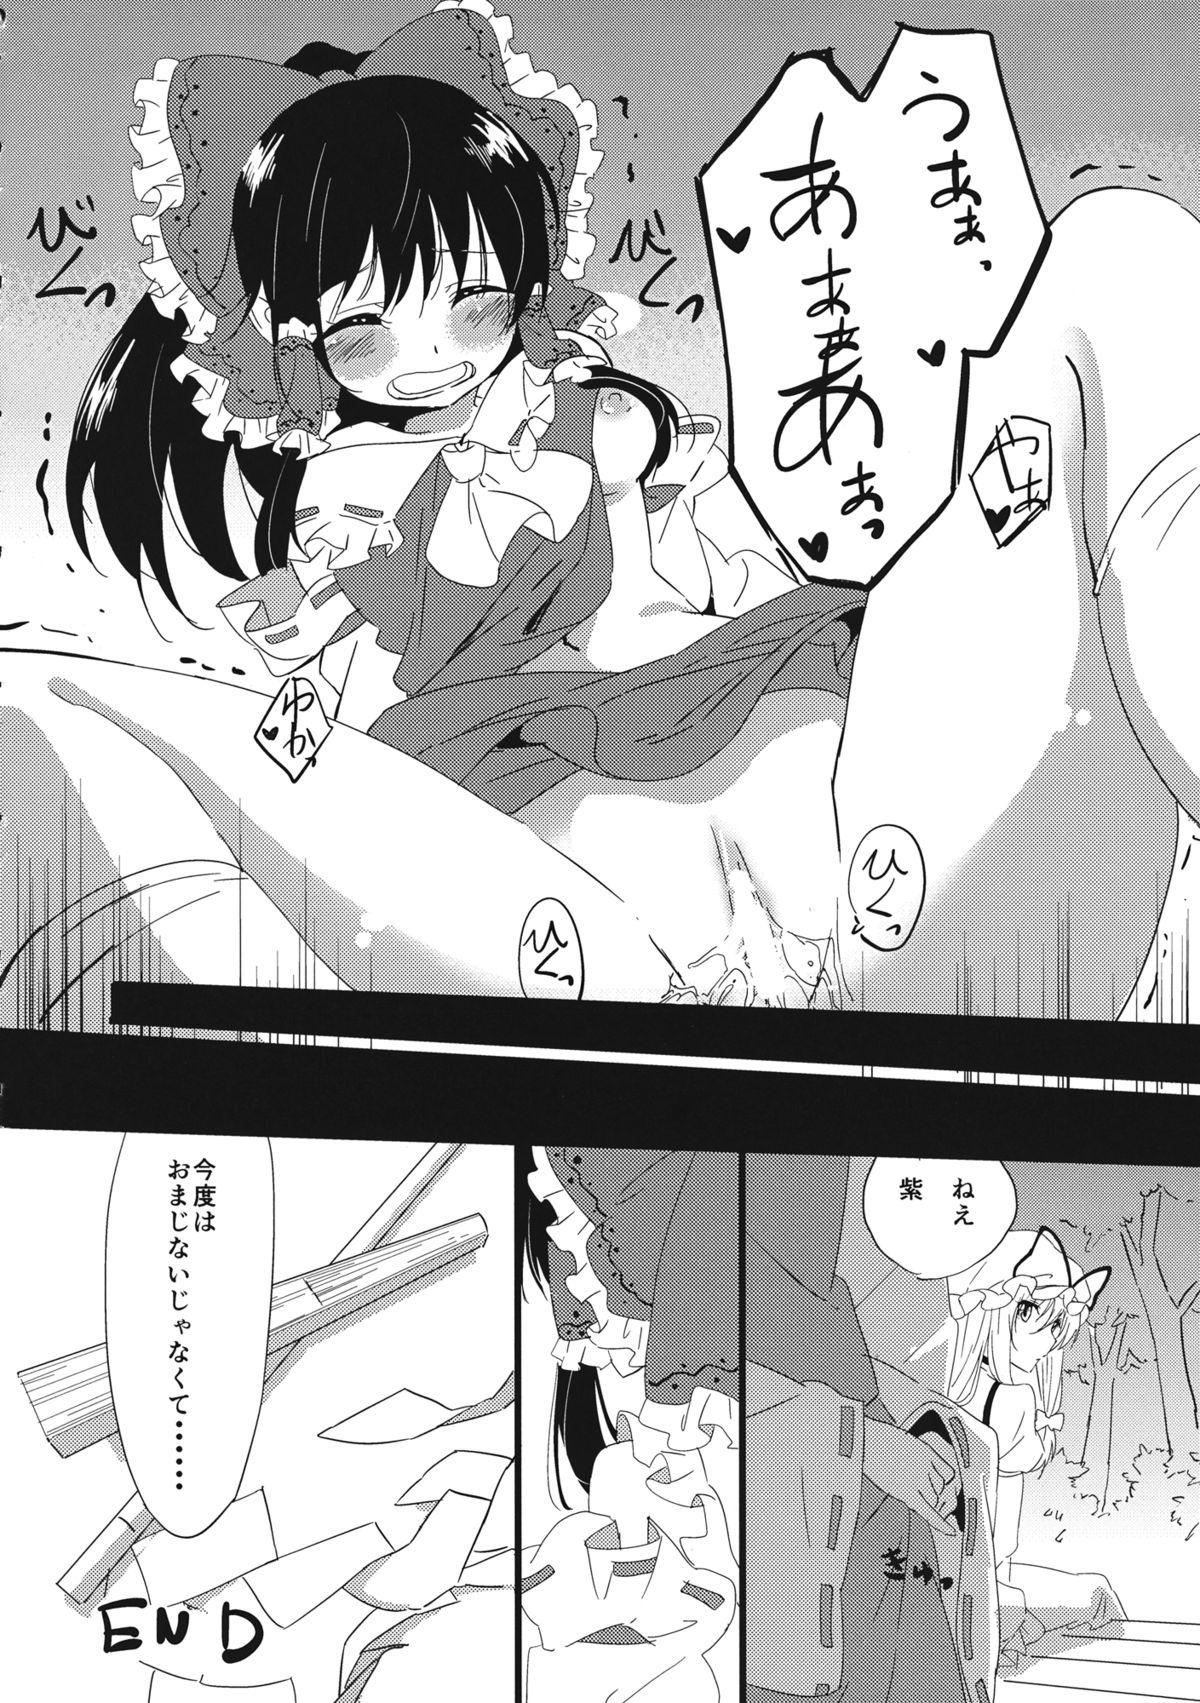 Passivo Touhou Muchi Shichu Goudou - Toho joint magazine sex in the ignorant situations - Touhou project Cum On Pussy - Page 8